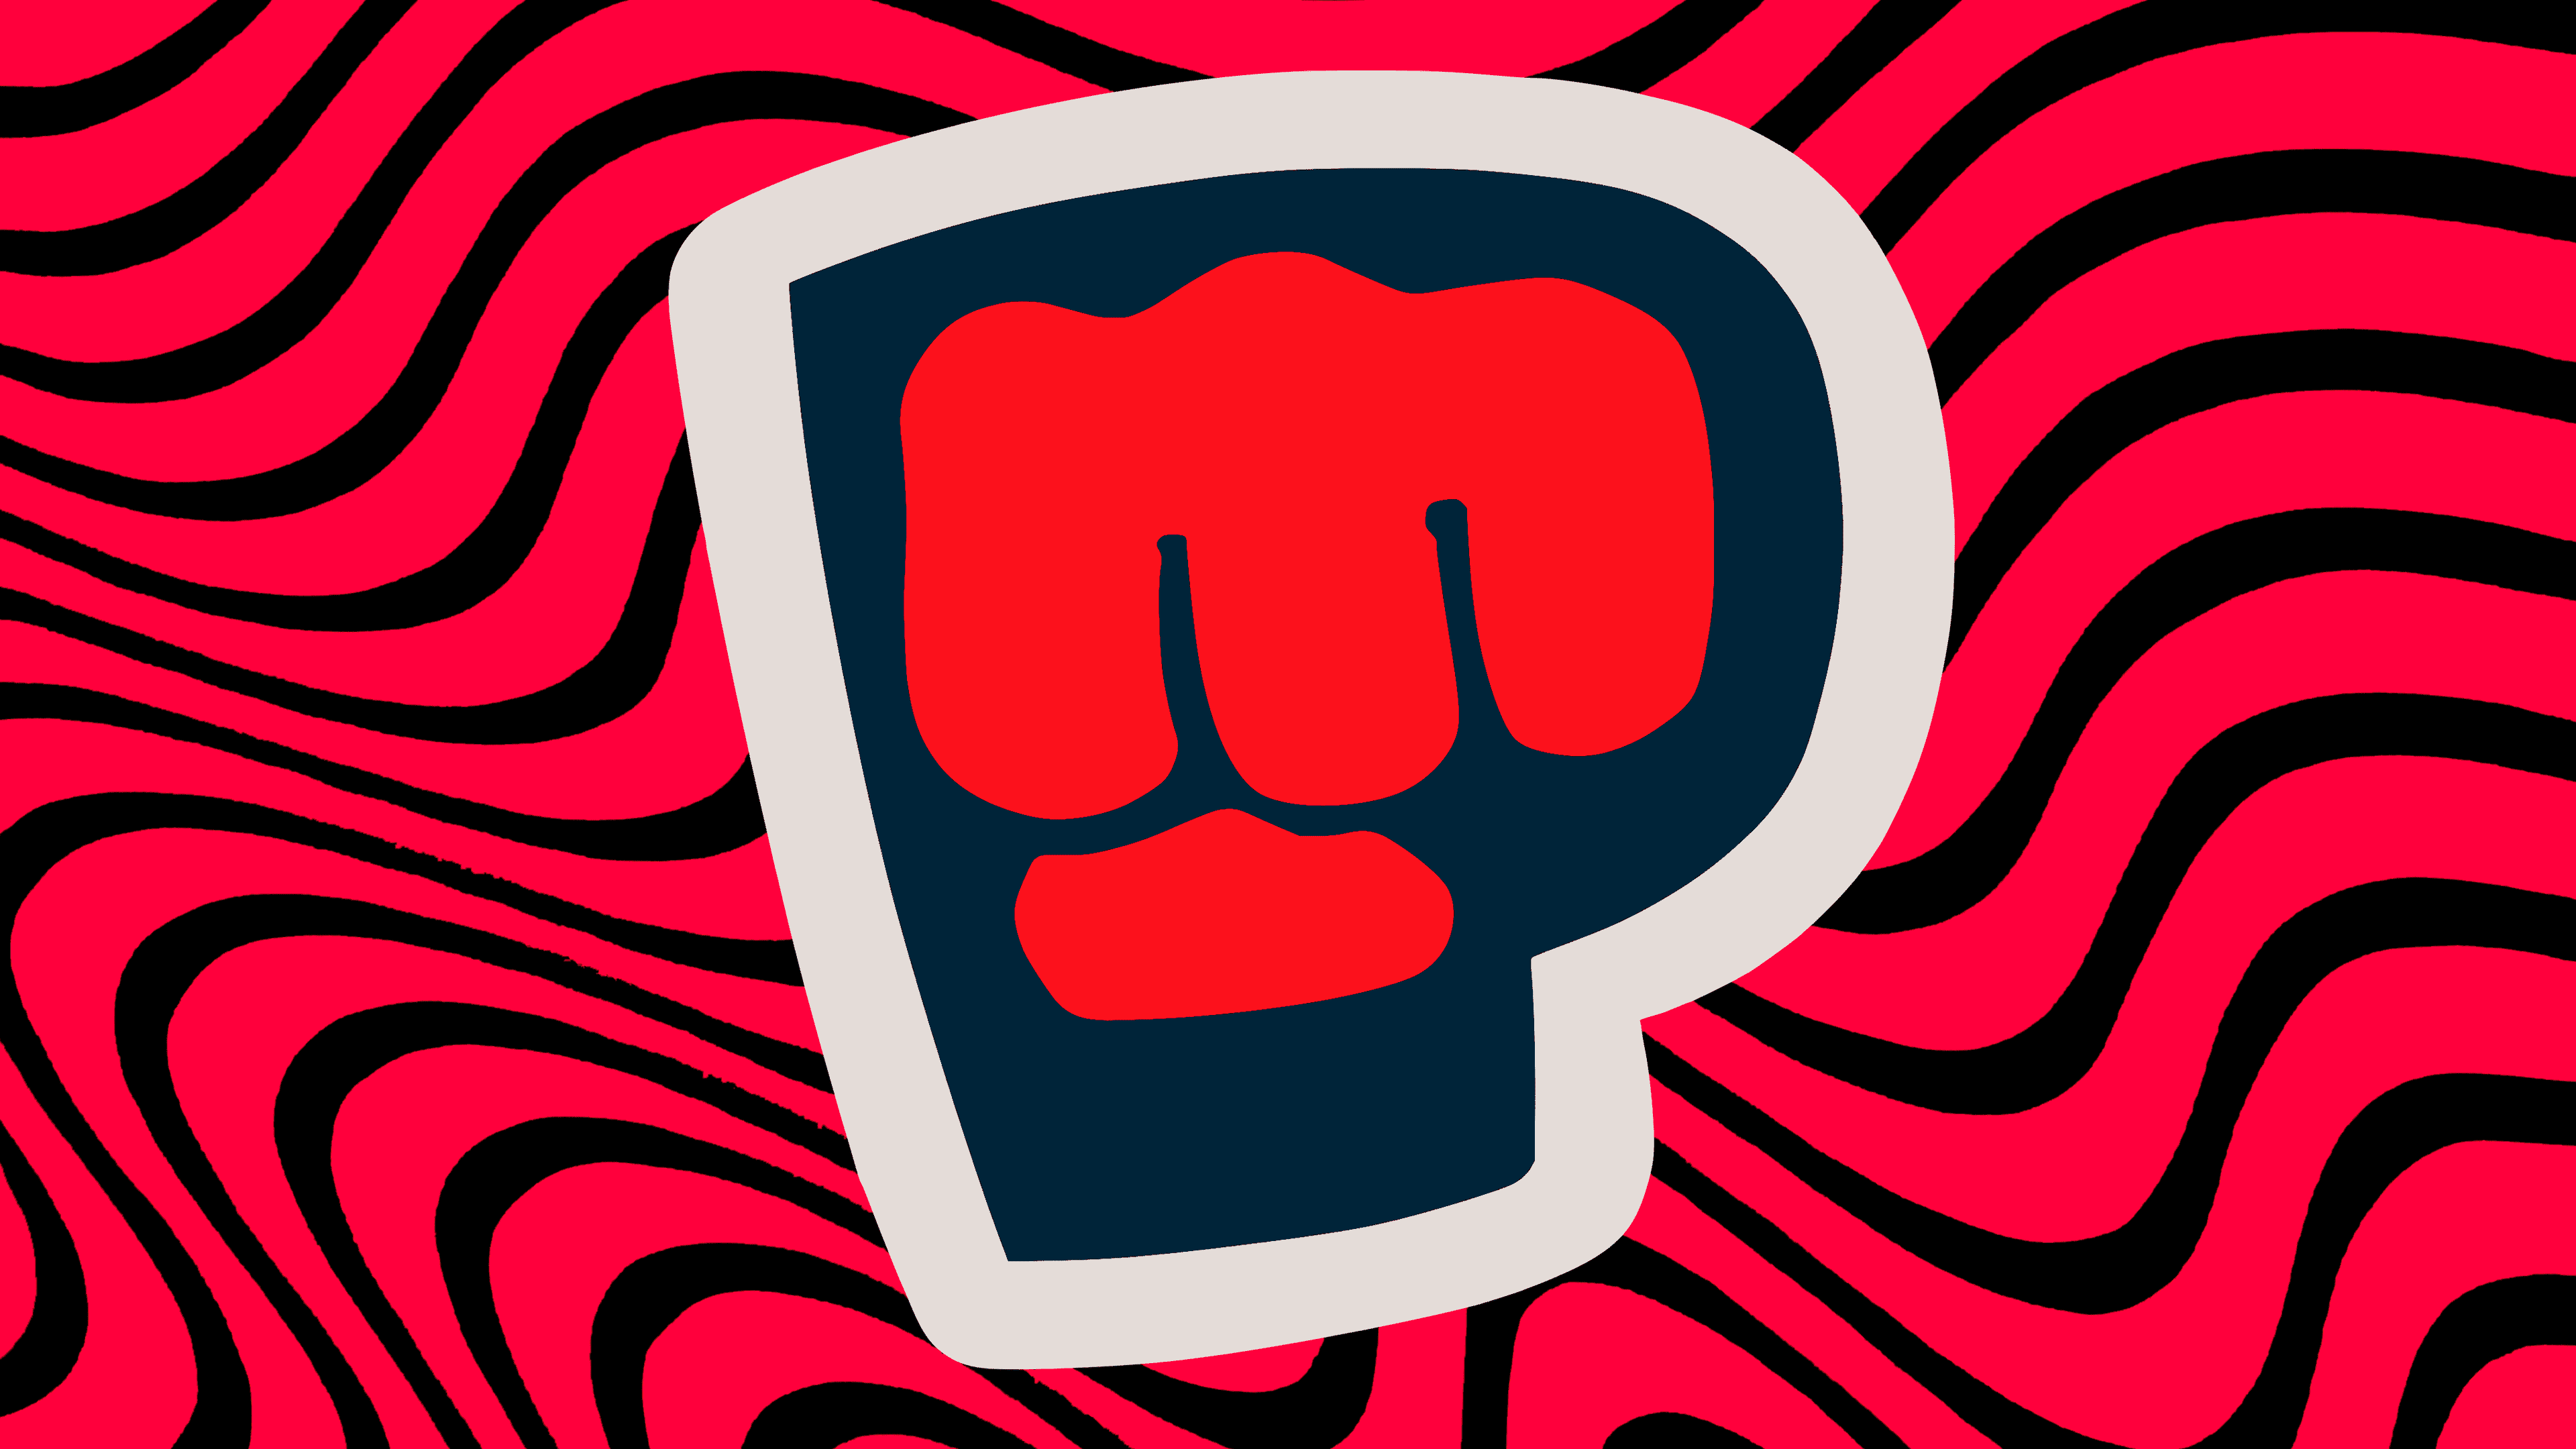 PewDiePie Logo And Symbol, Meaning, History, PNG, Brand | 6b.u5ch.com